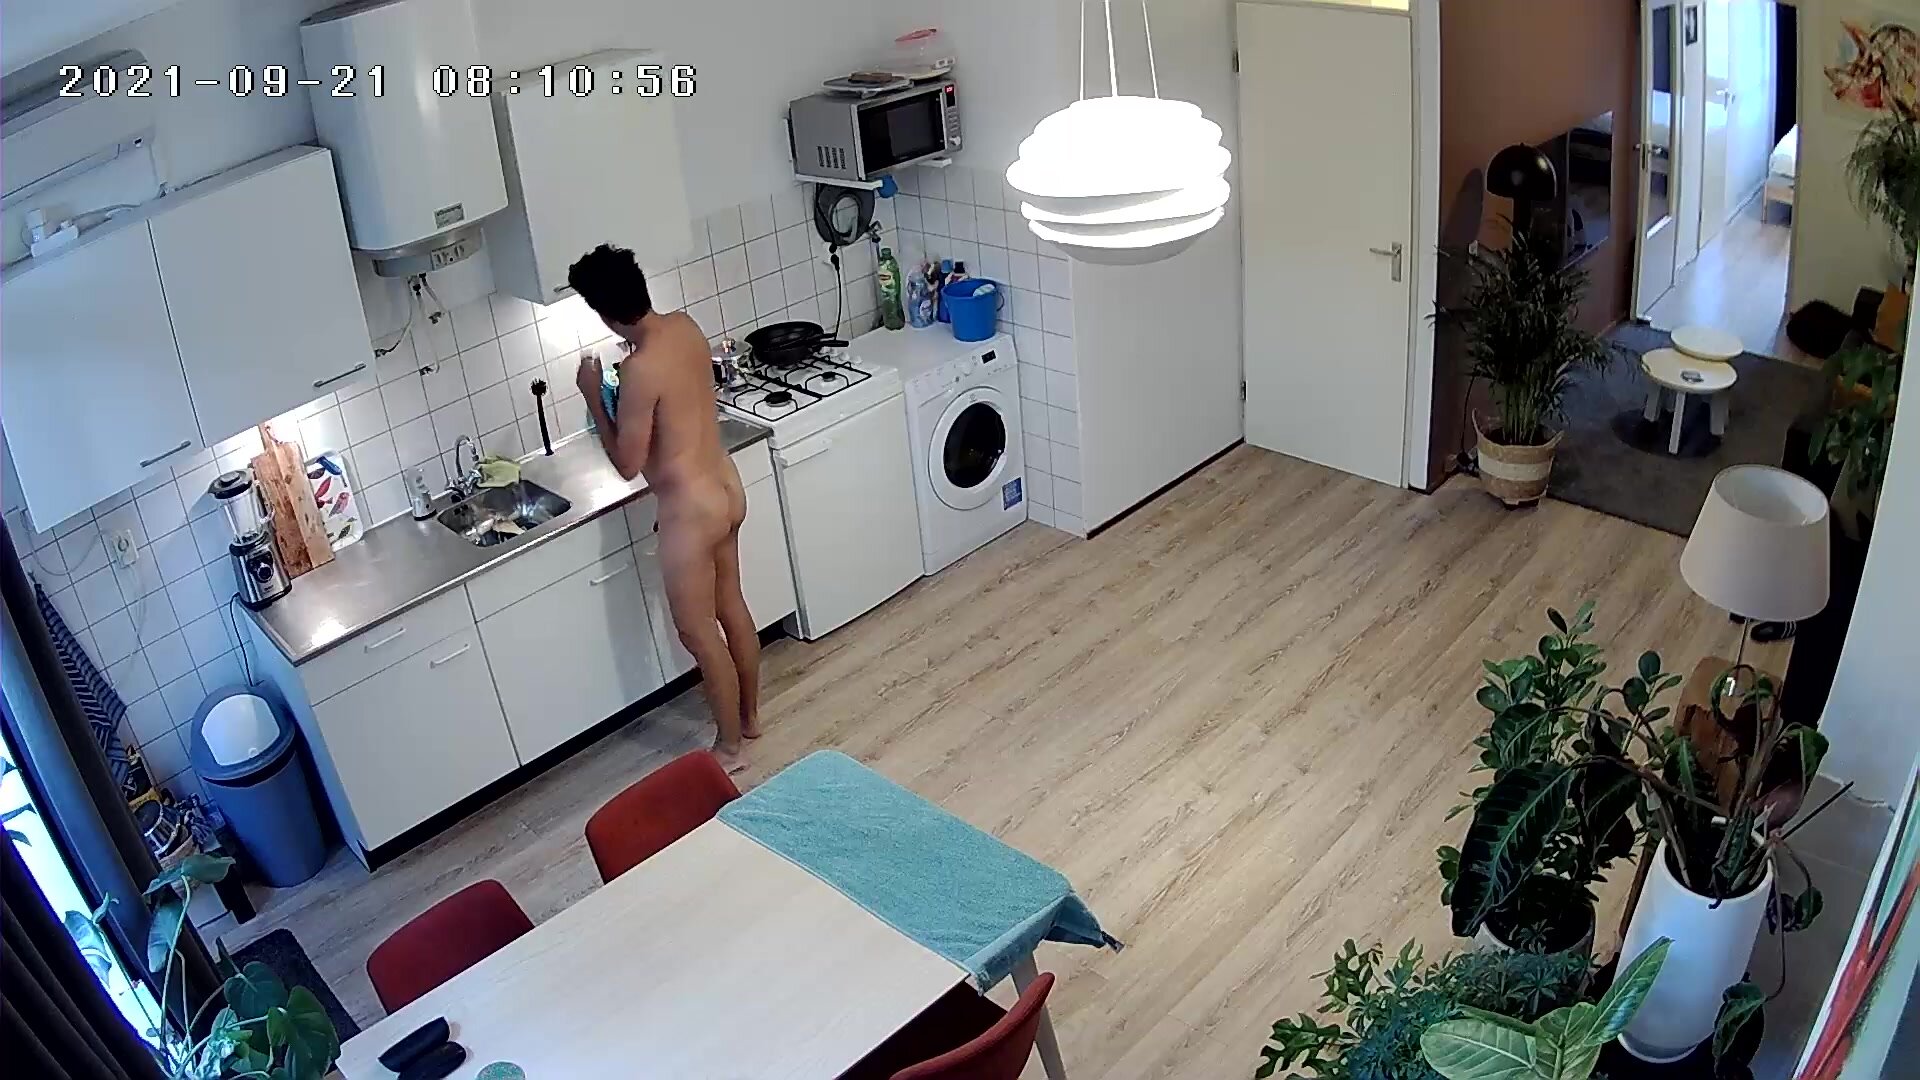 Dutch fit guy naked on IPCAM